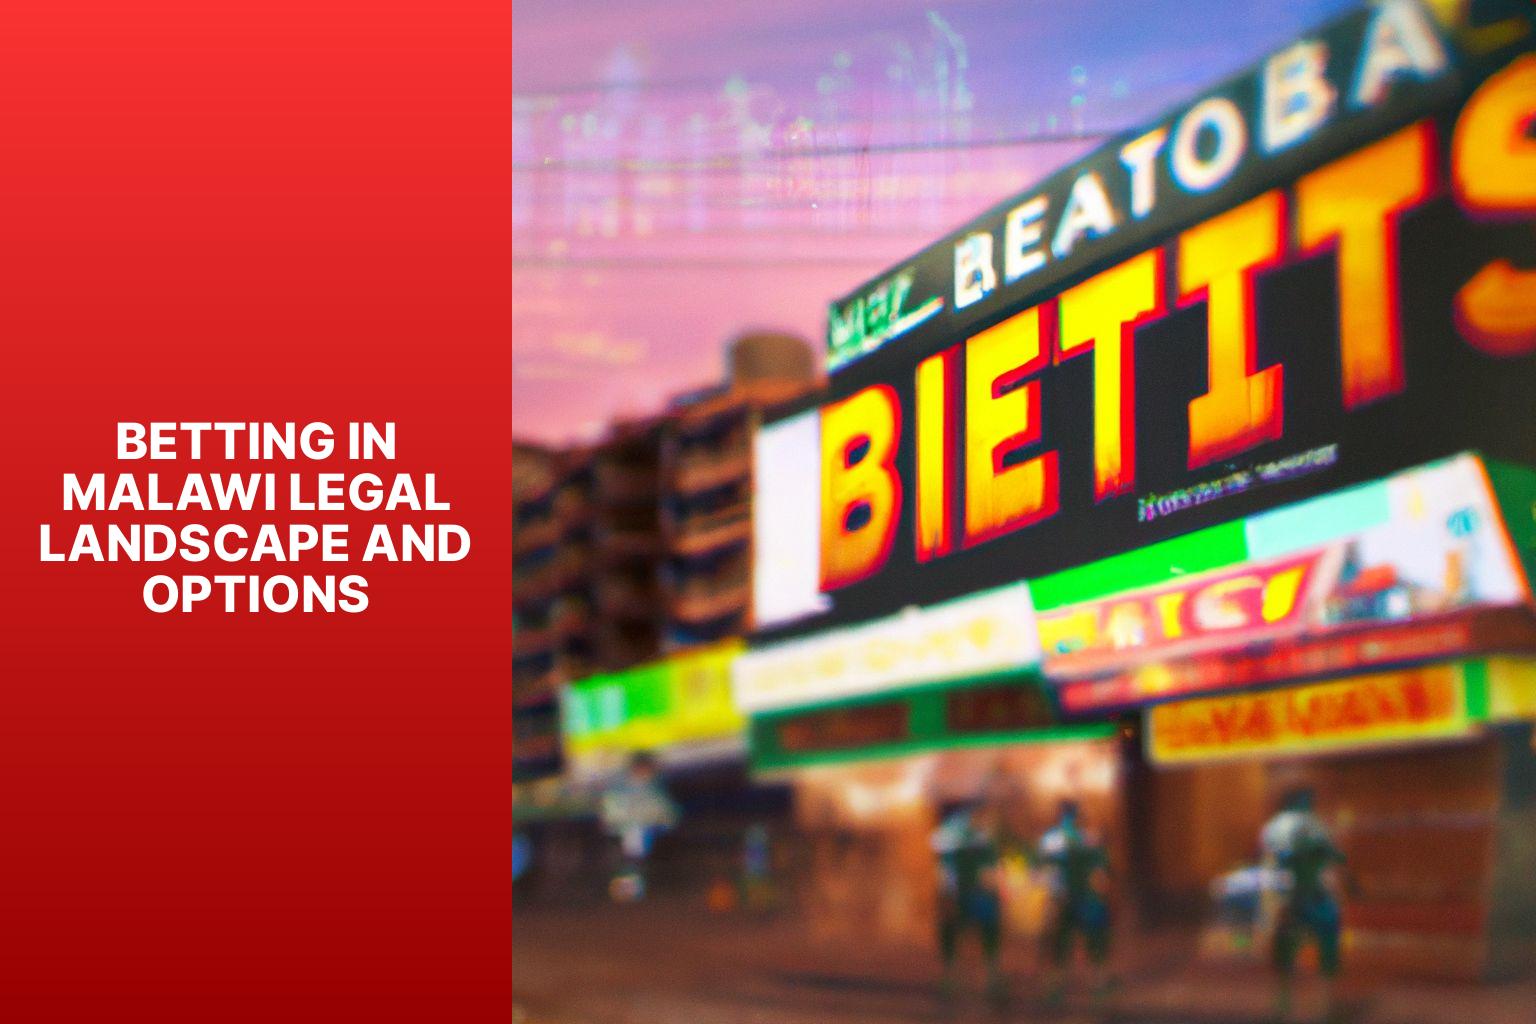 Betting in Malawi Legal Landscape and Options